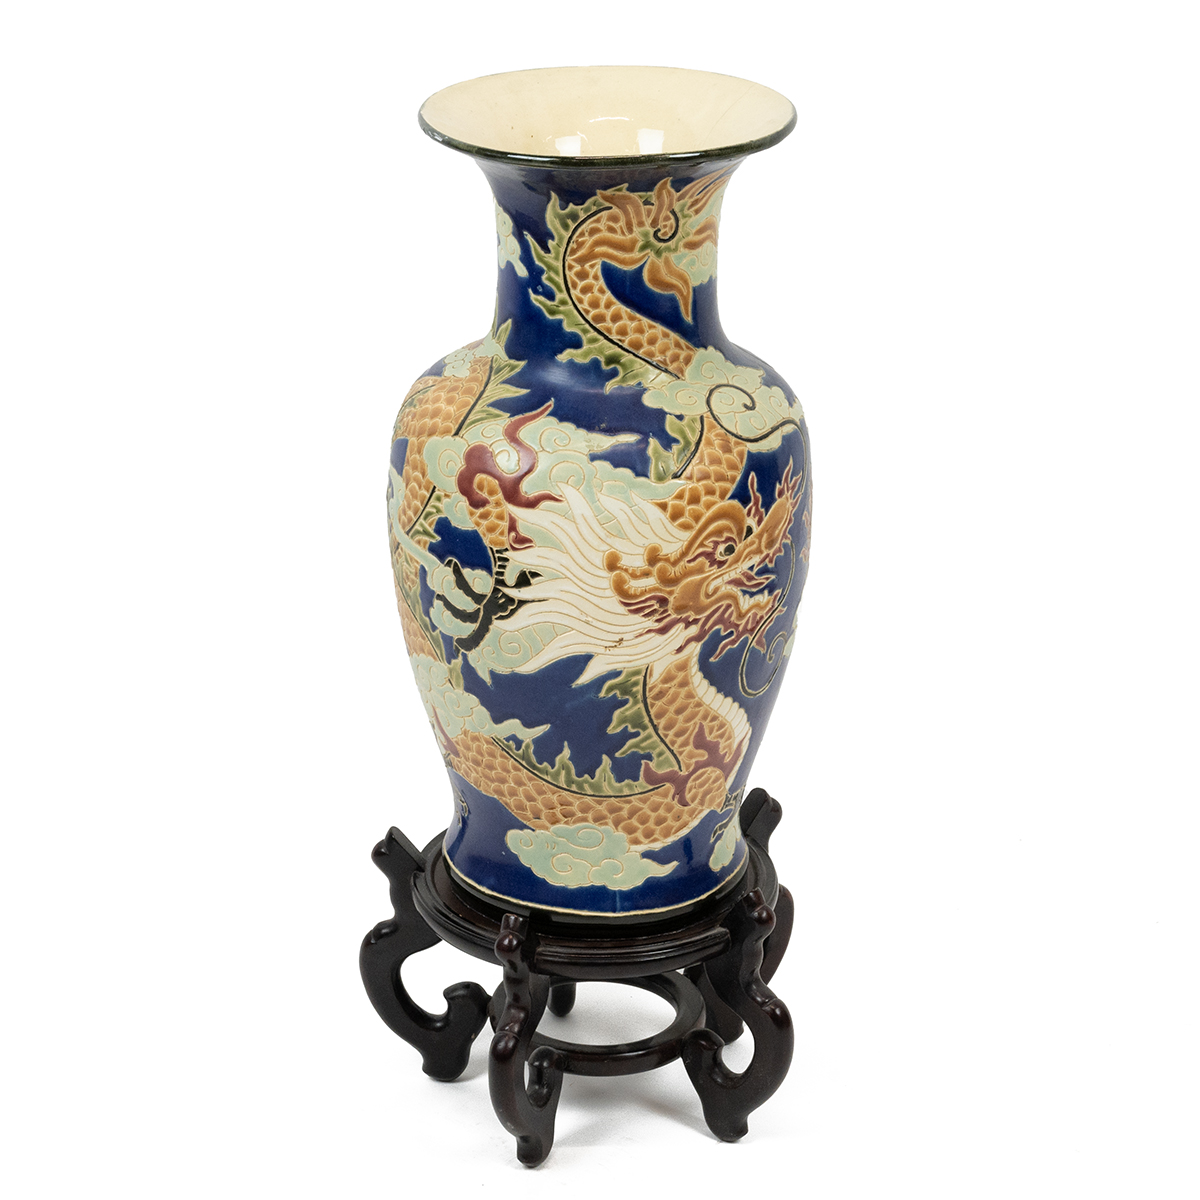 Oriental baluster form floor standing vase with polychrome design depicting a four toed dragon ch...